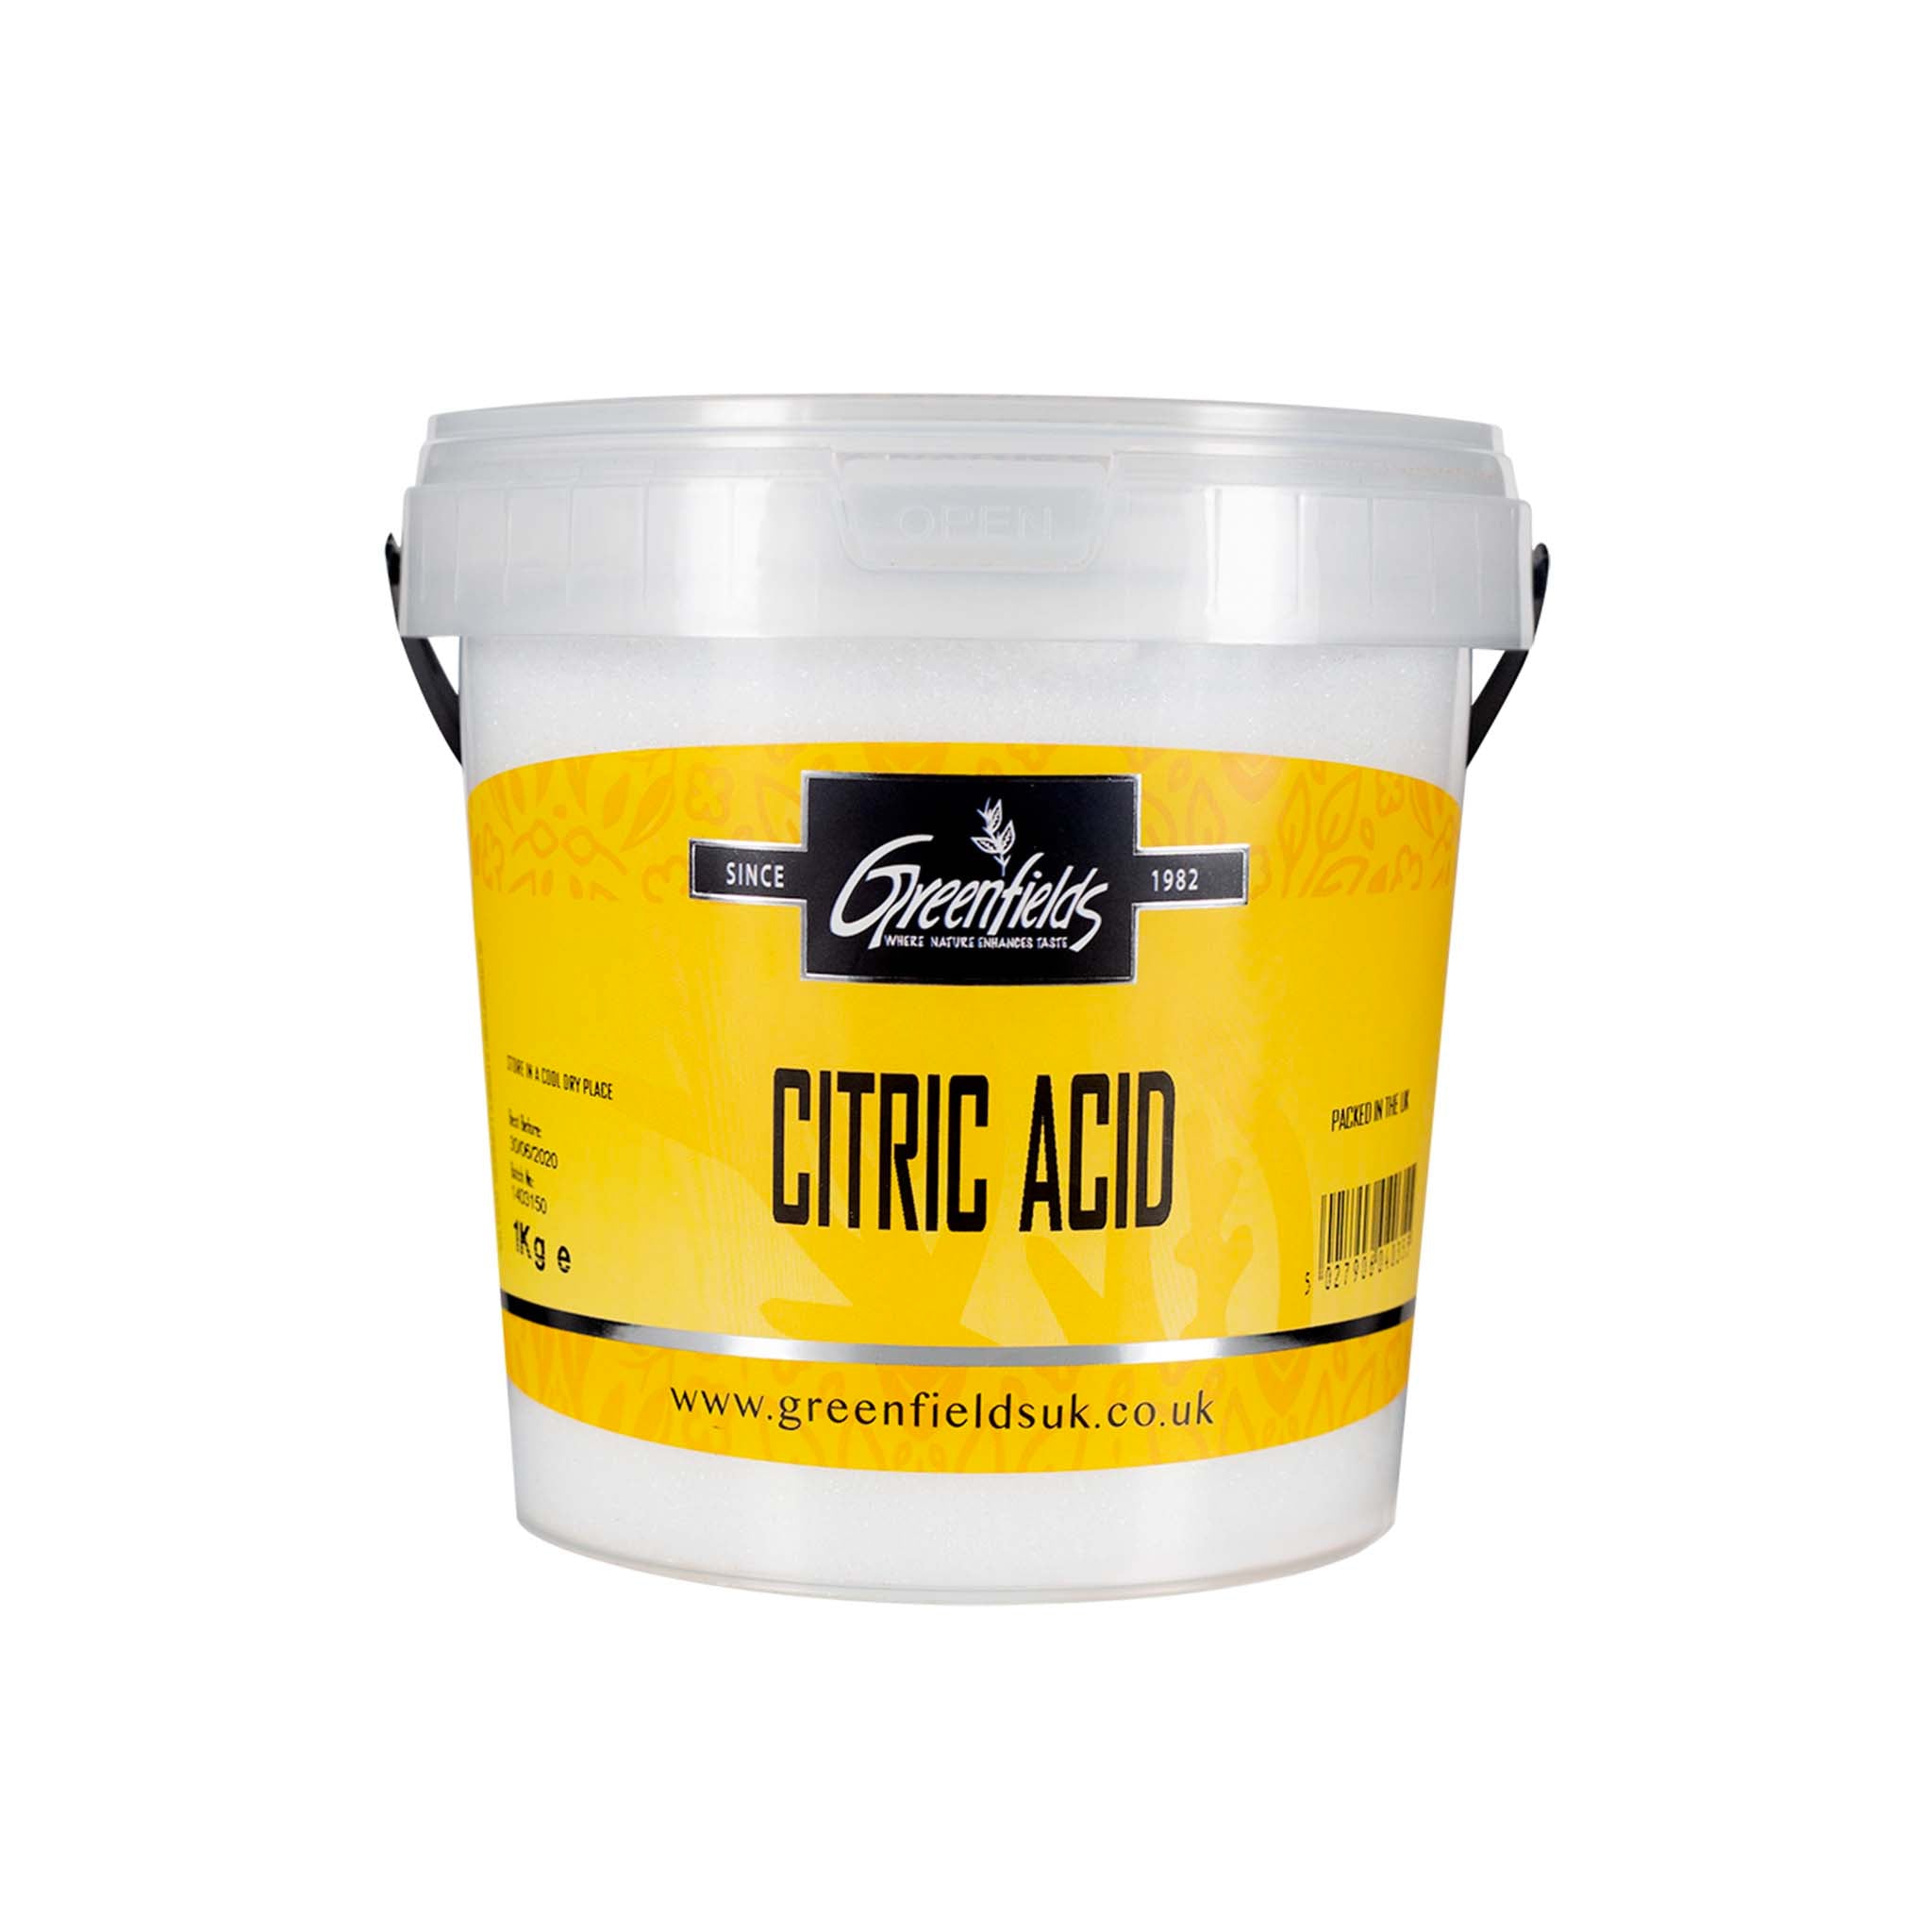 Greenfields Citric Acid